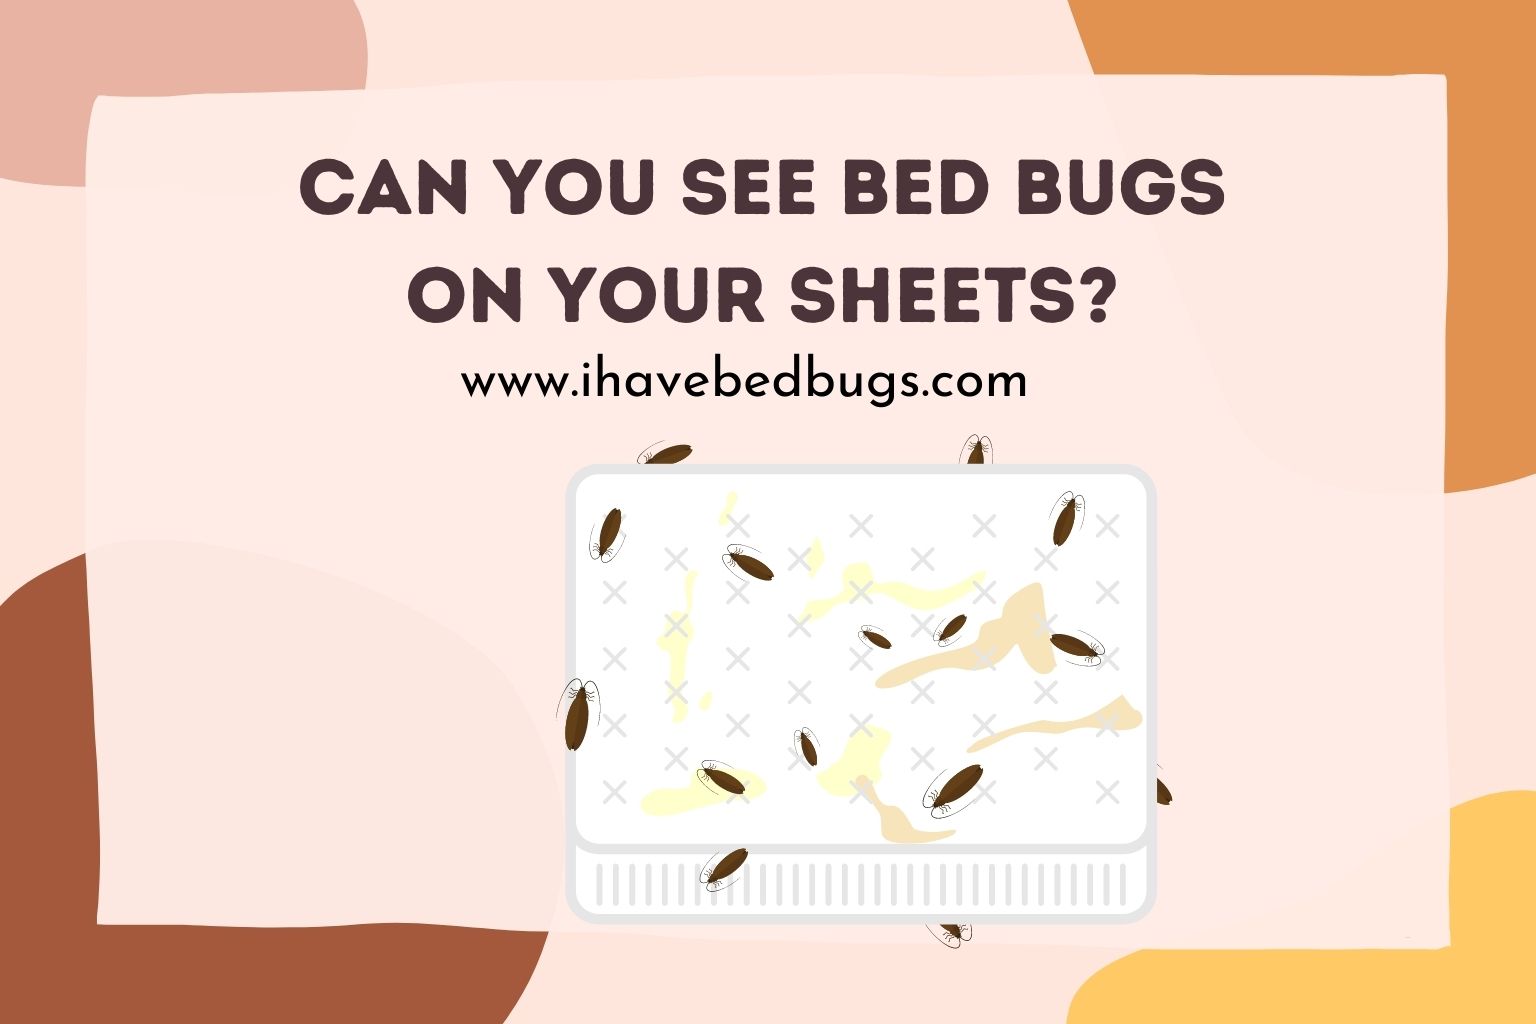 Can you see bed bugs on your sheets